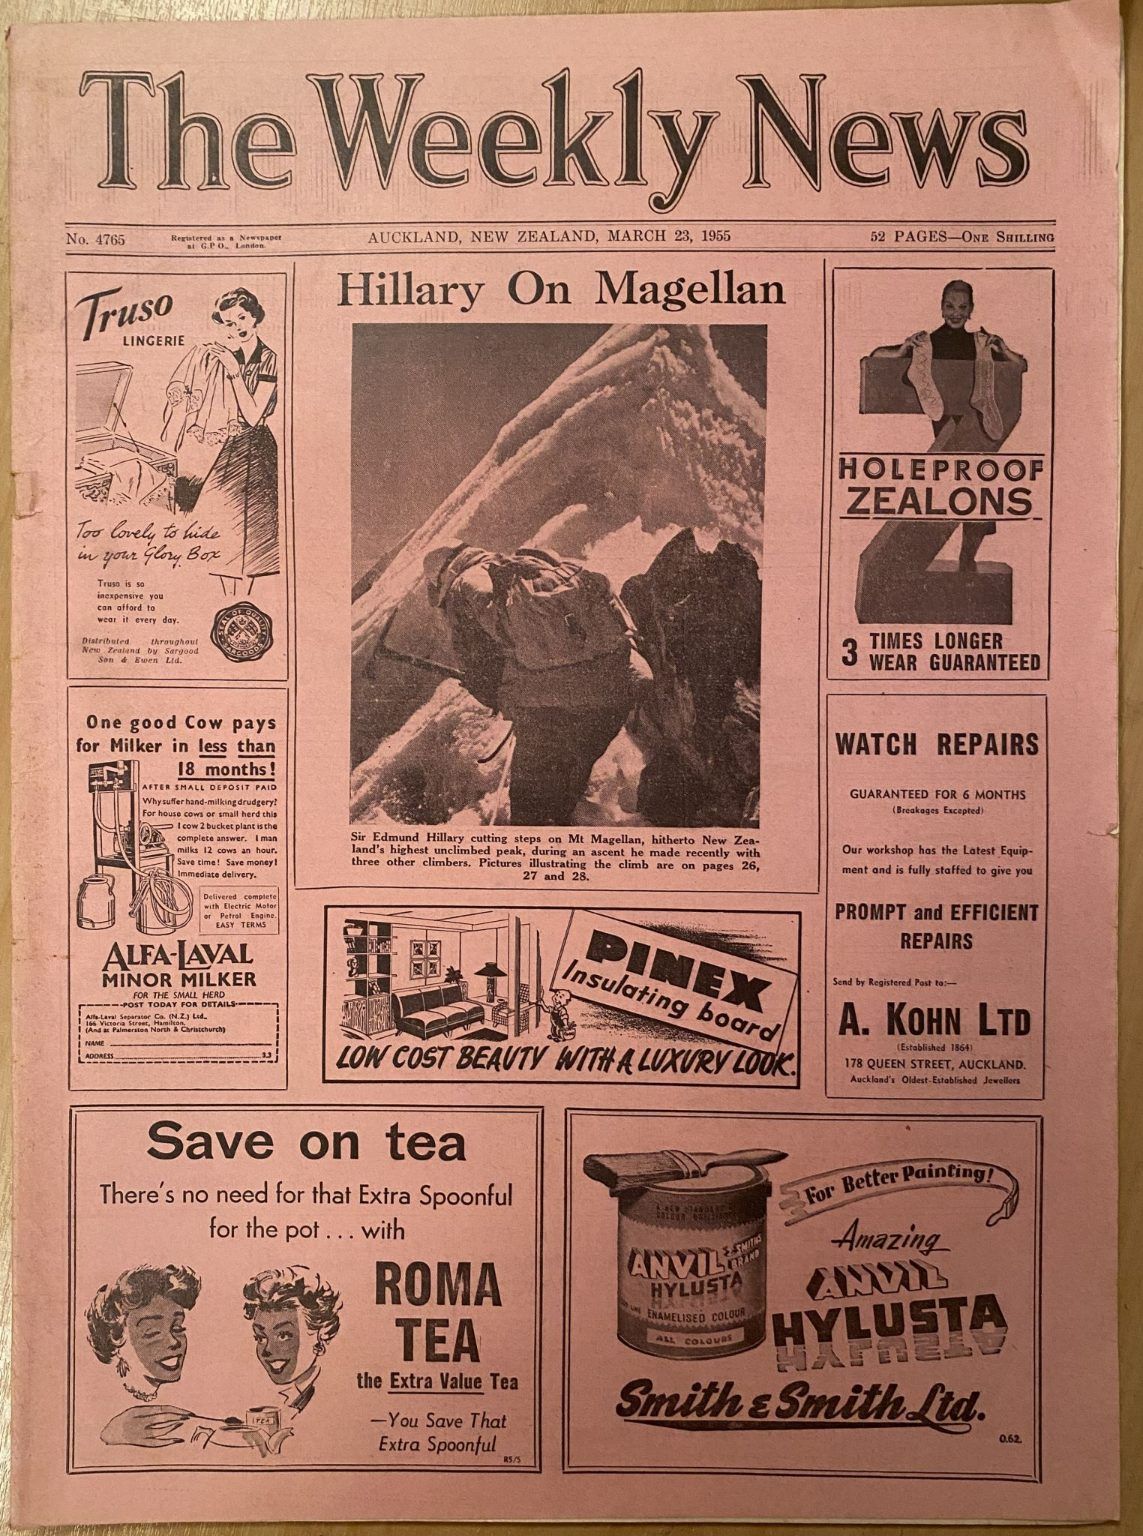 OLD NEWSPAPER: The Weekly News - No. 4765, 23 March 1955